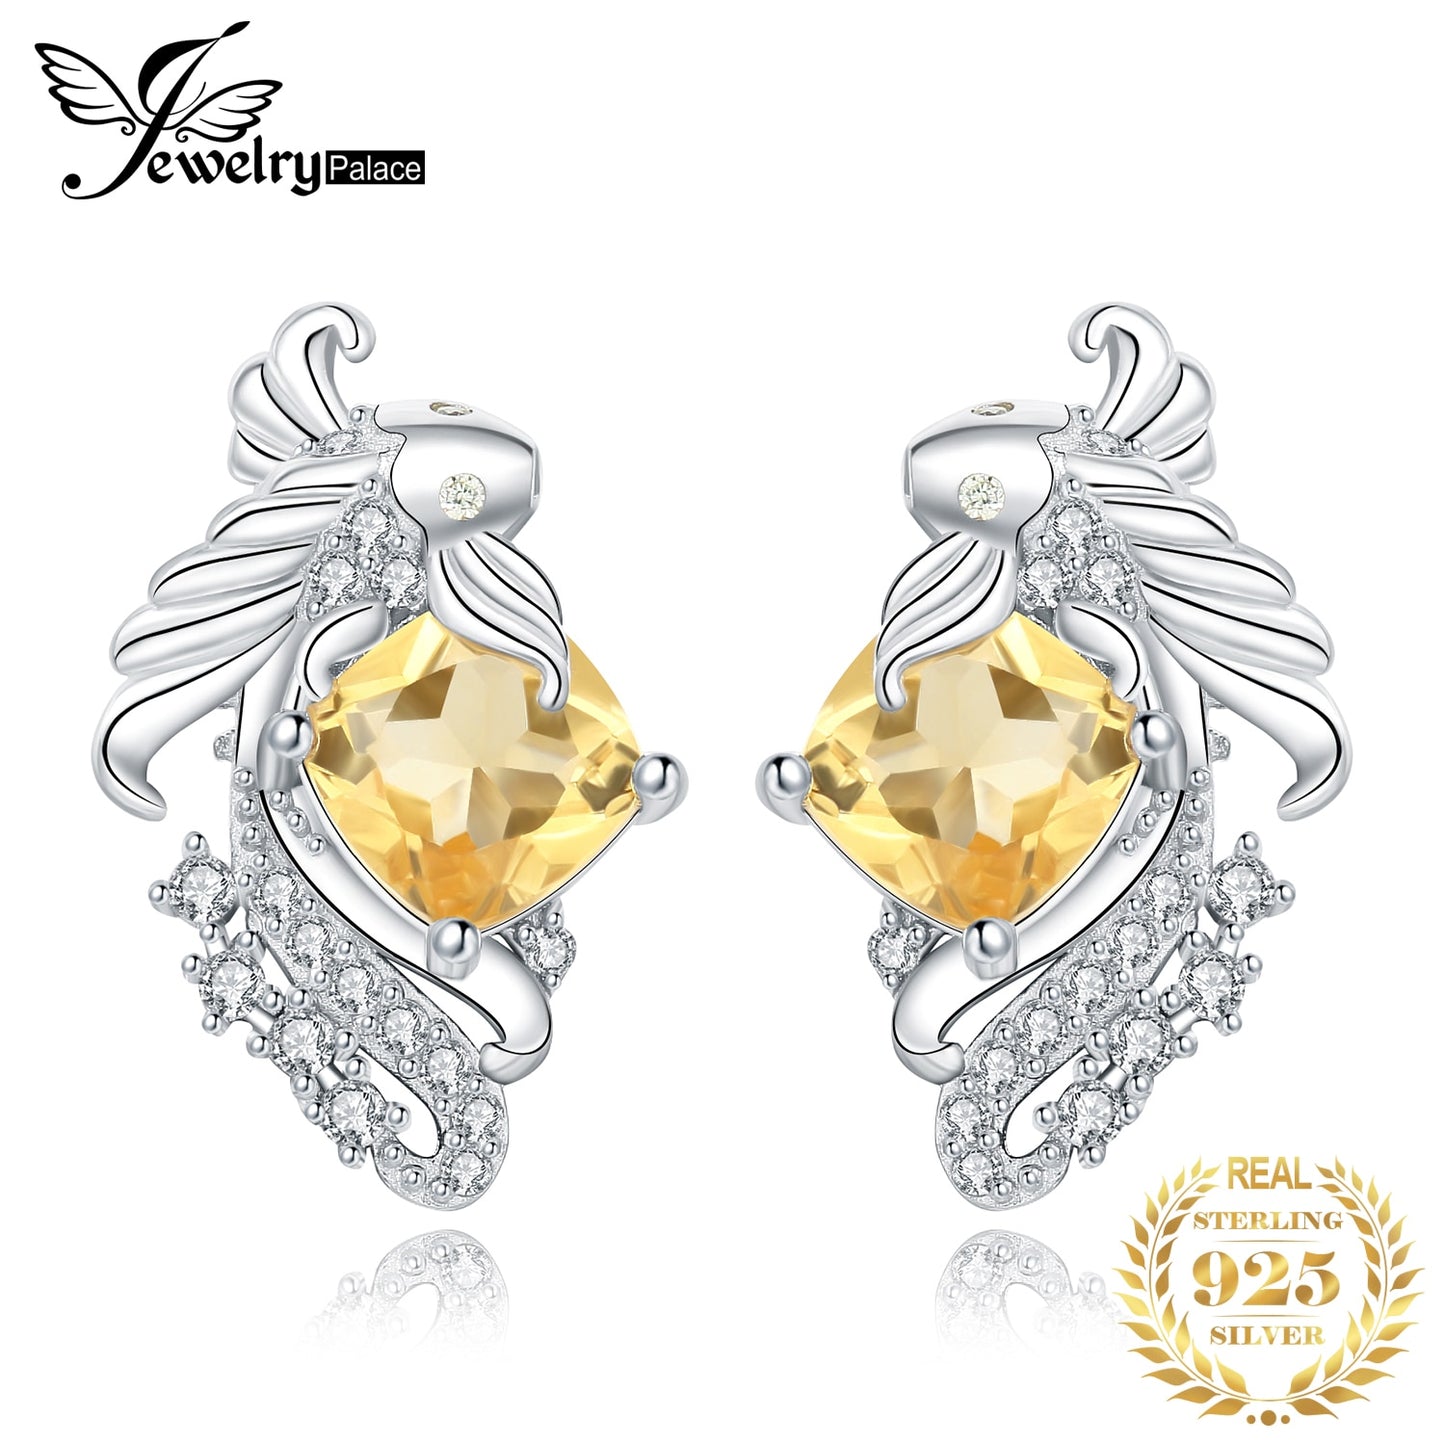 JewelryPalace New Arrival Lucky Koi Fish Cushion Genuine Citrine 925 Sterling Silver Stud Earrings For Woman Fashion Jewelry Default Title